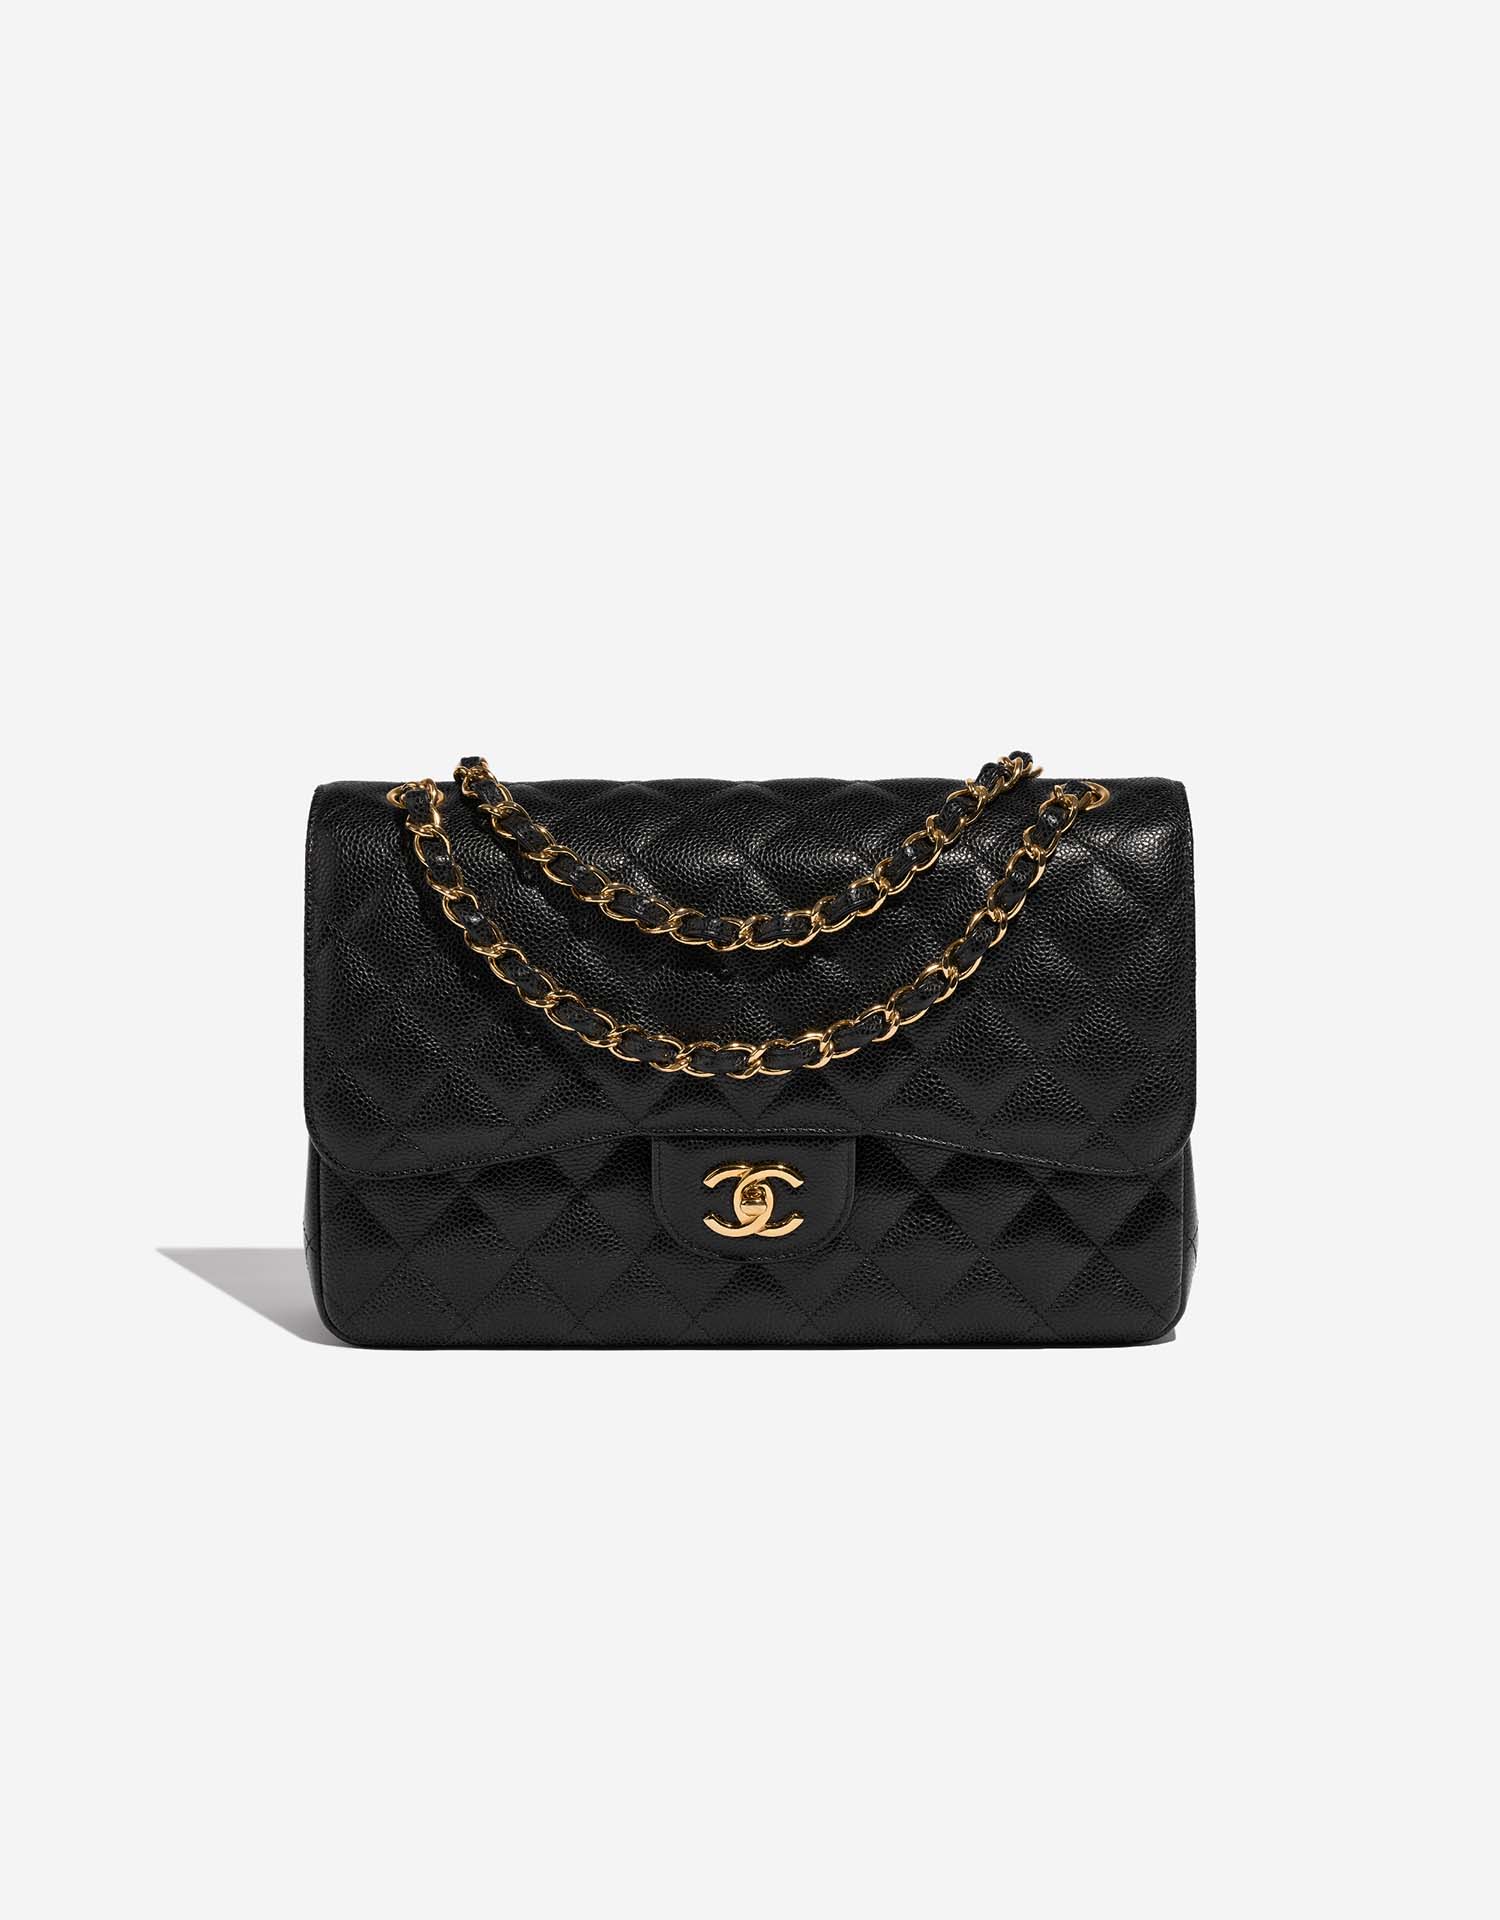 MEDIUM CHANEL CLASSIC DOUBLE FLAP BAG  Review & What Fits Inside! Black  Caviar Leather With Gold 